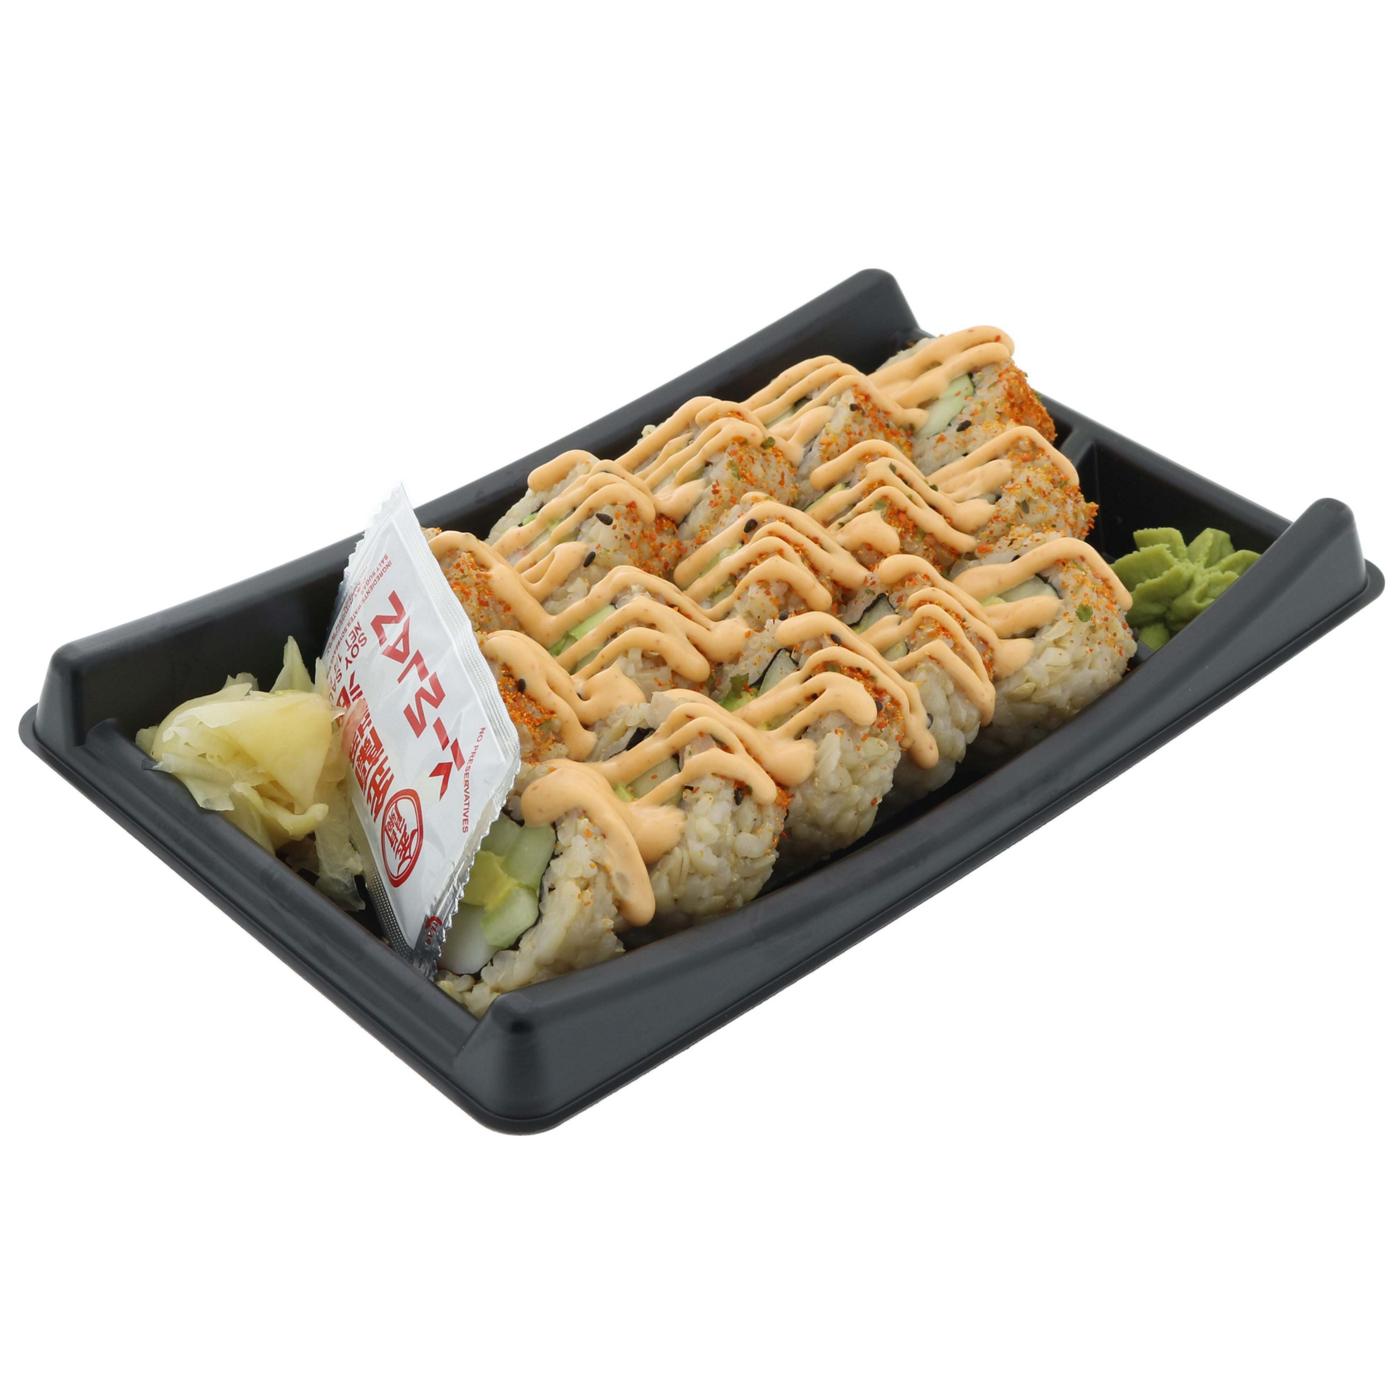 H-E-B Sushiya Spicy California Sushi Roll Value Pack – Brown Rice; image 1 of 2